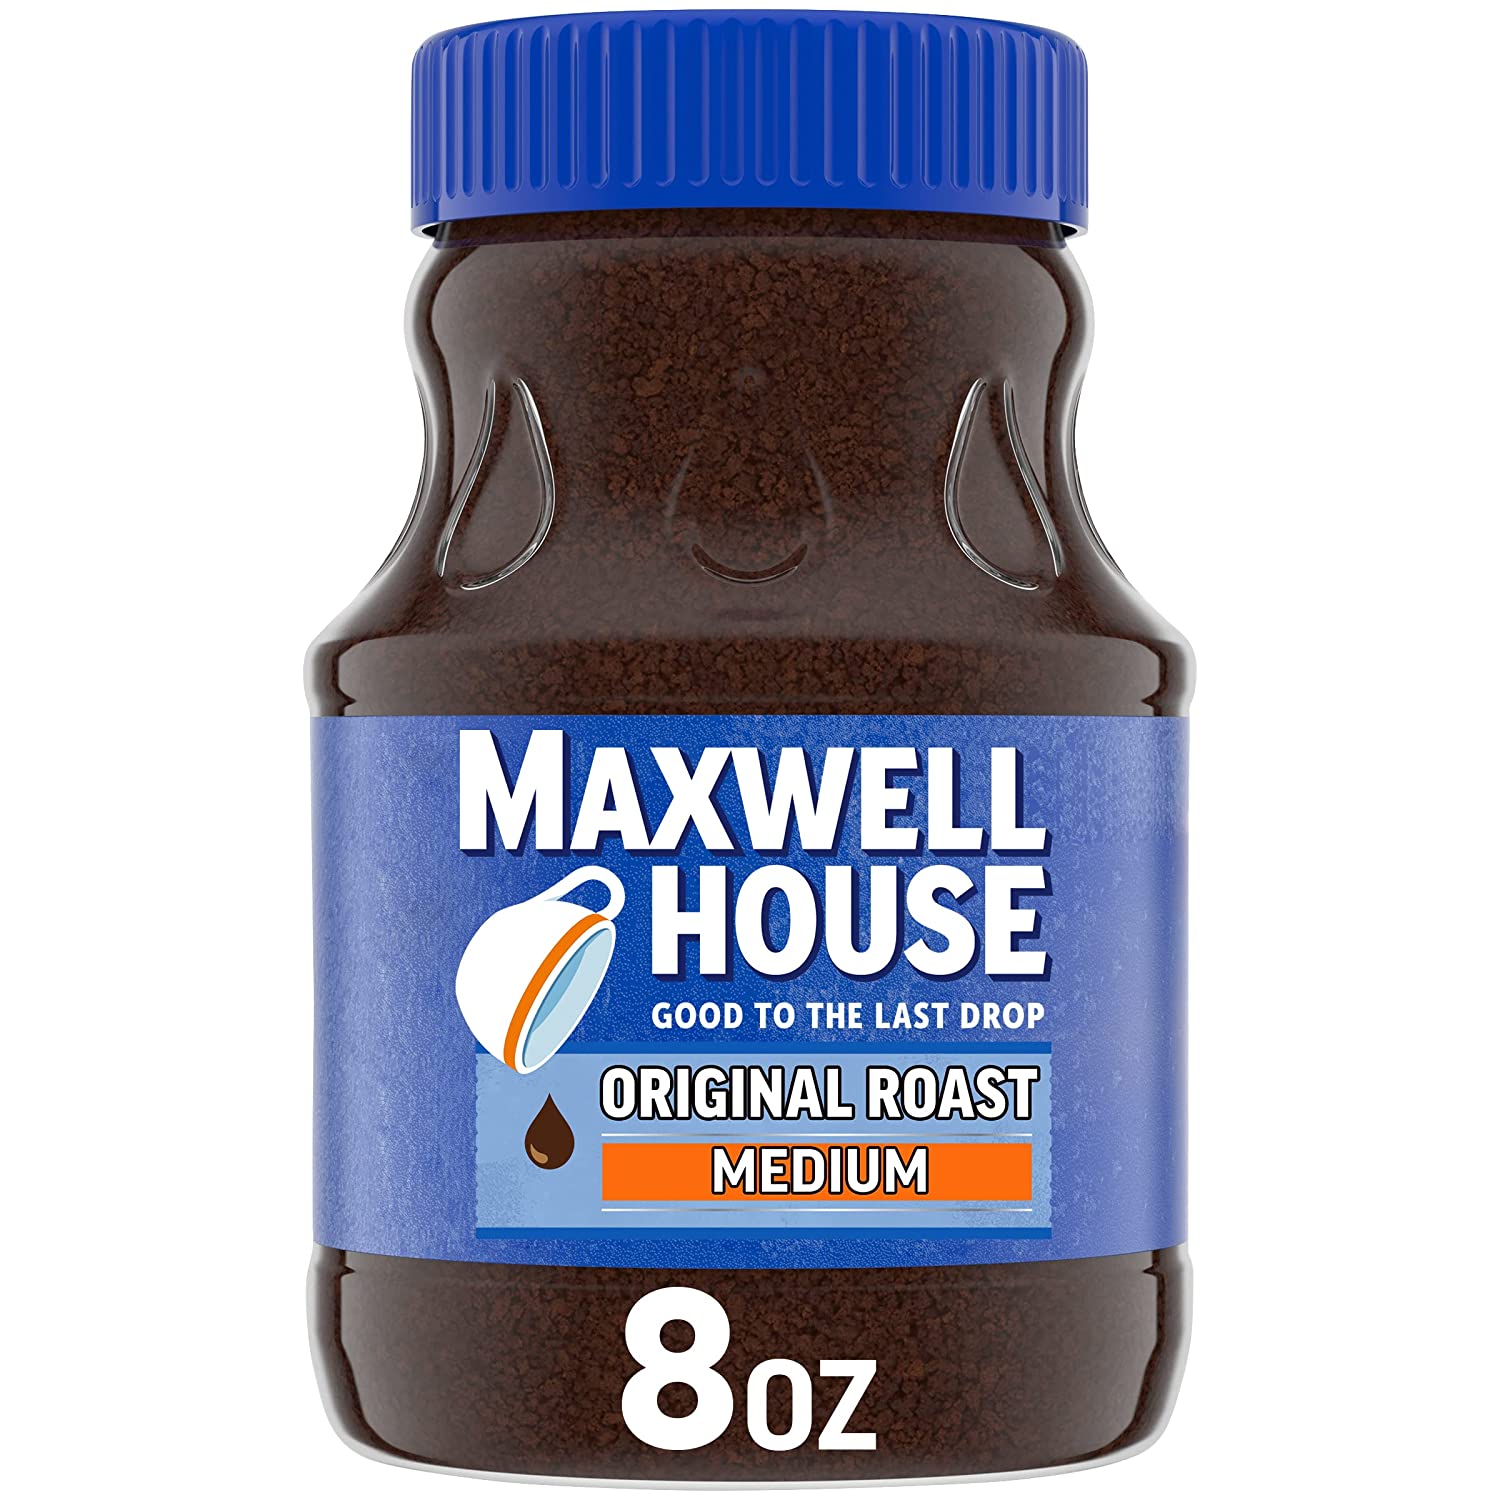 Is Maxwell House instant coffee discontinued